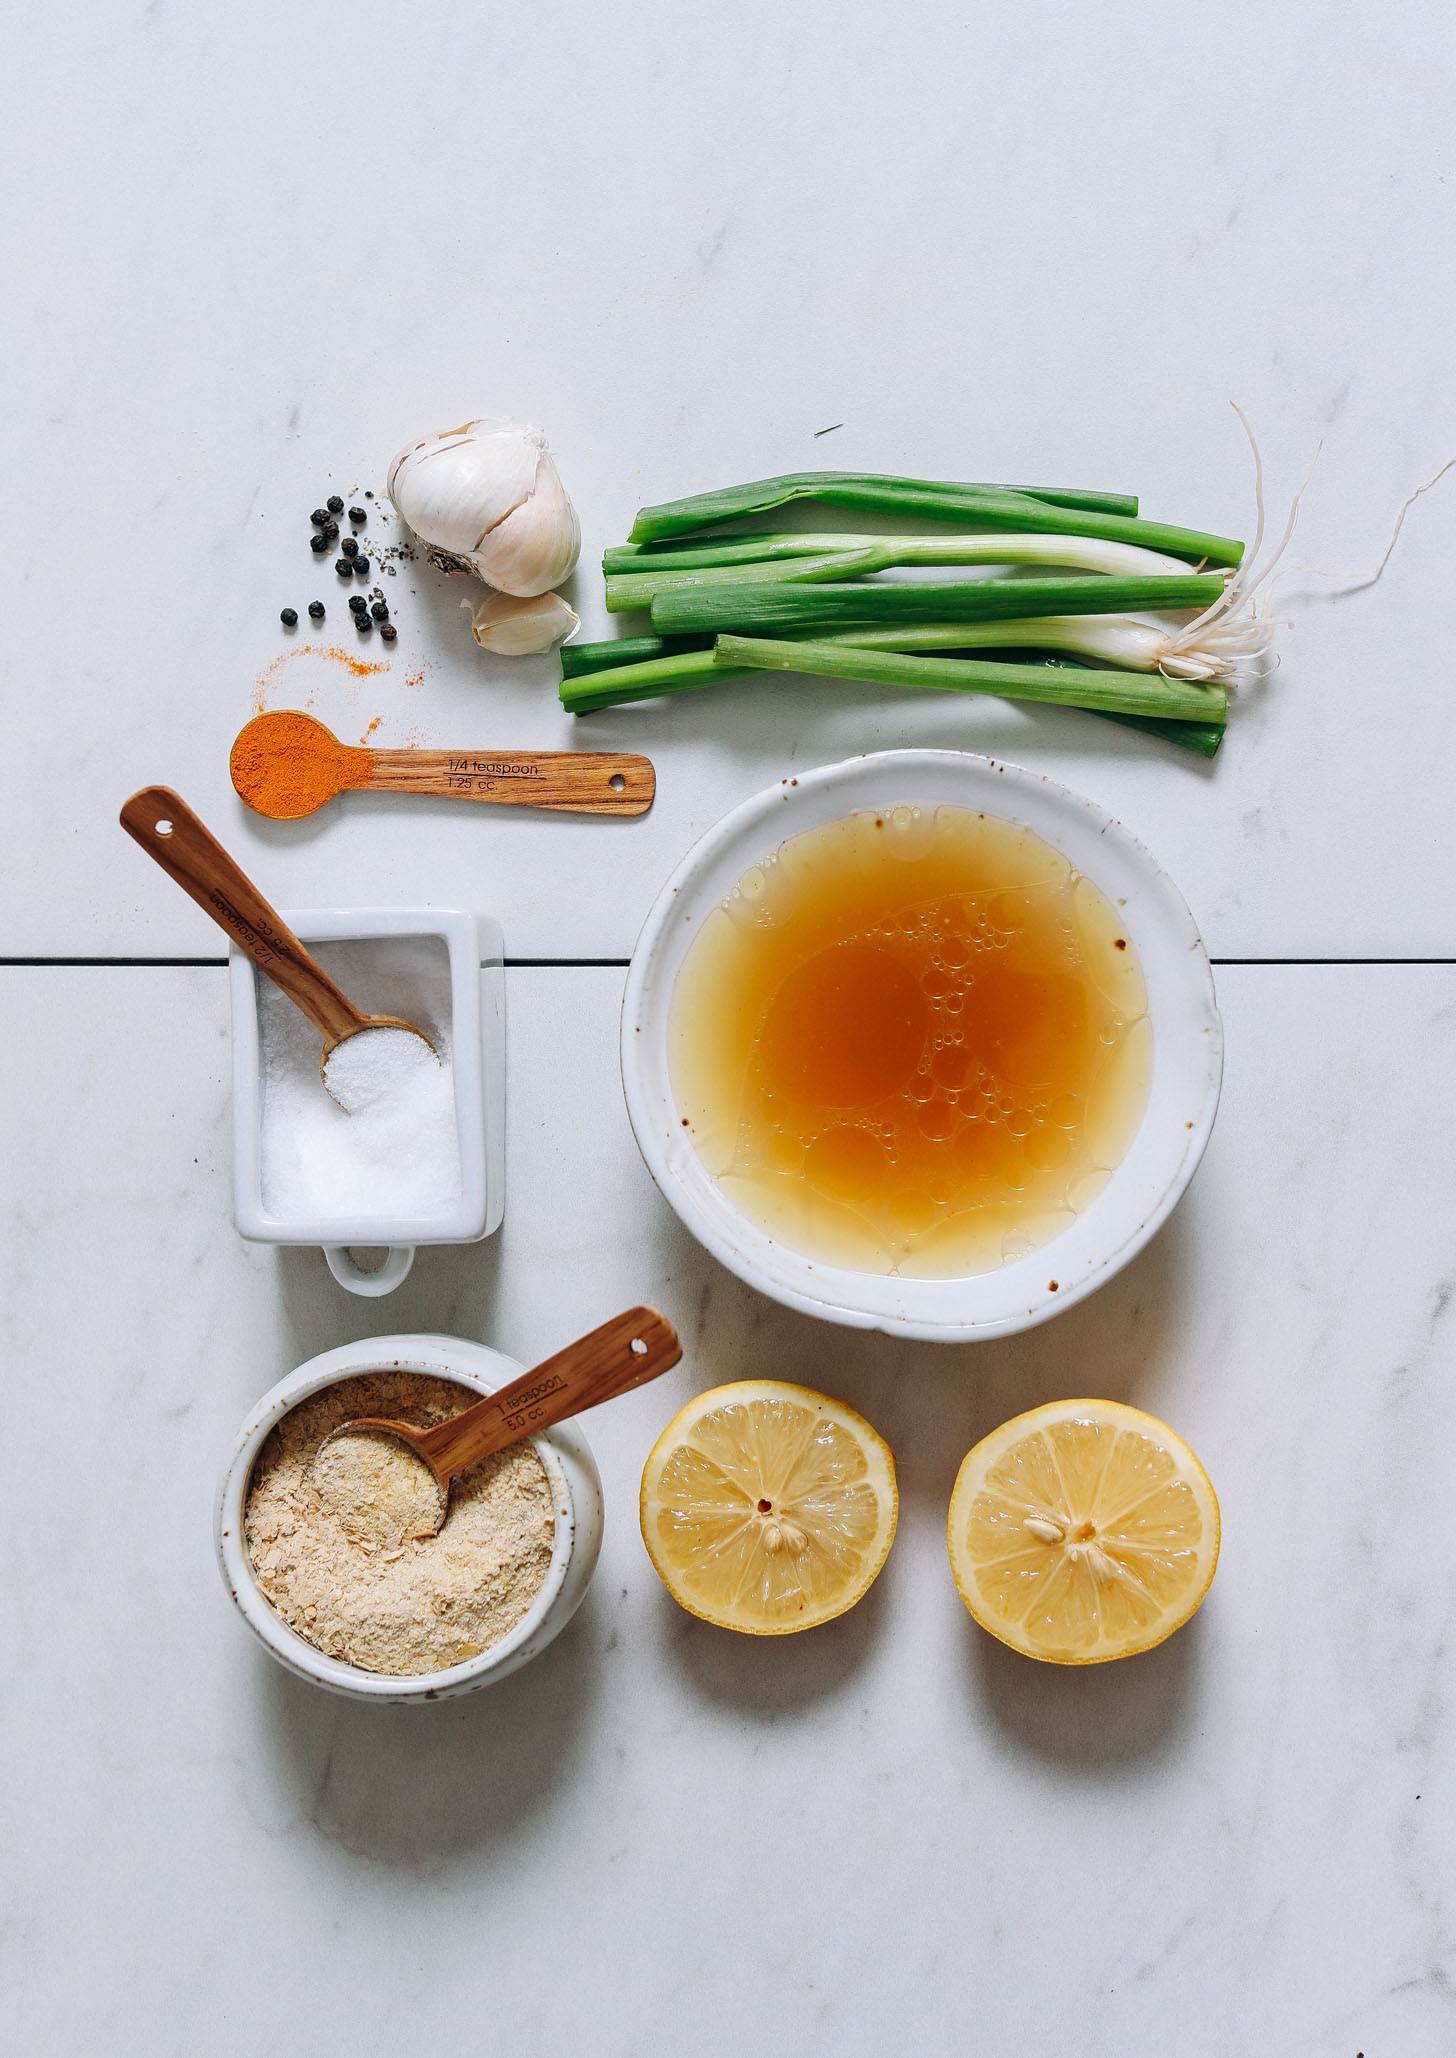 Bone broth, nutritional yeast, green onion, turmeric, and other ingredients for making our Nourishing Bone Broth Tonic recipe